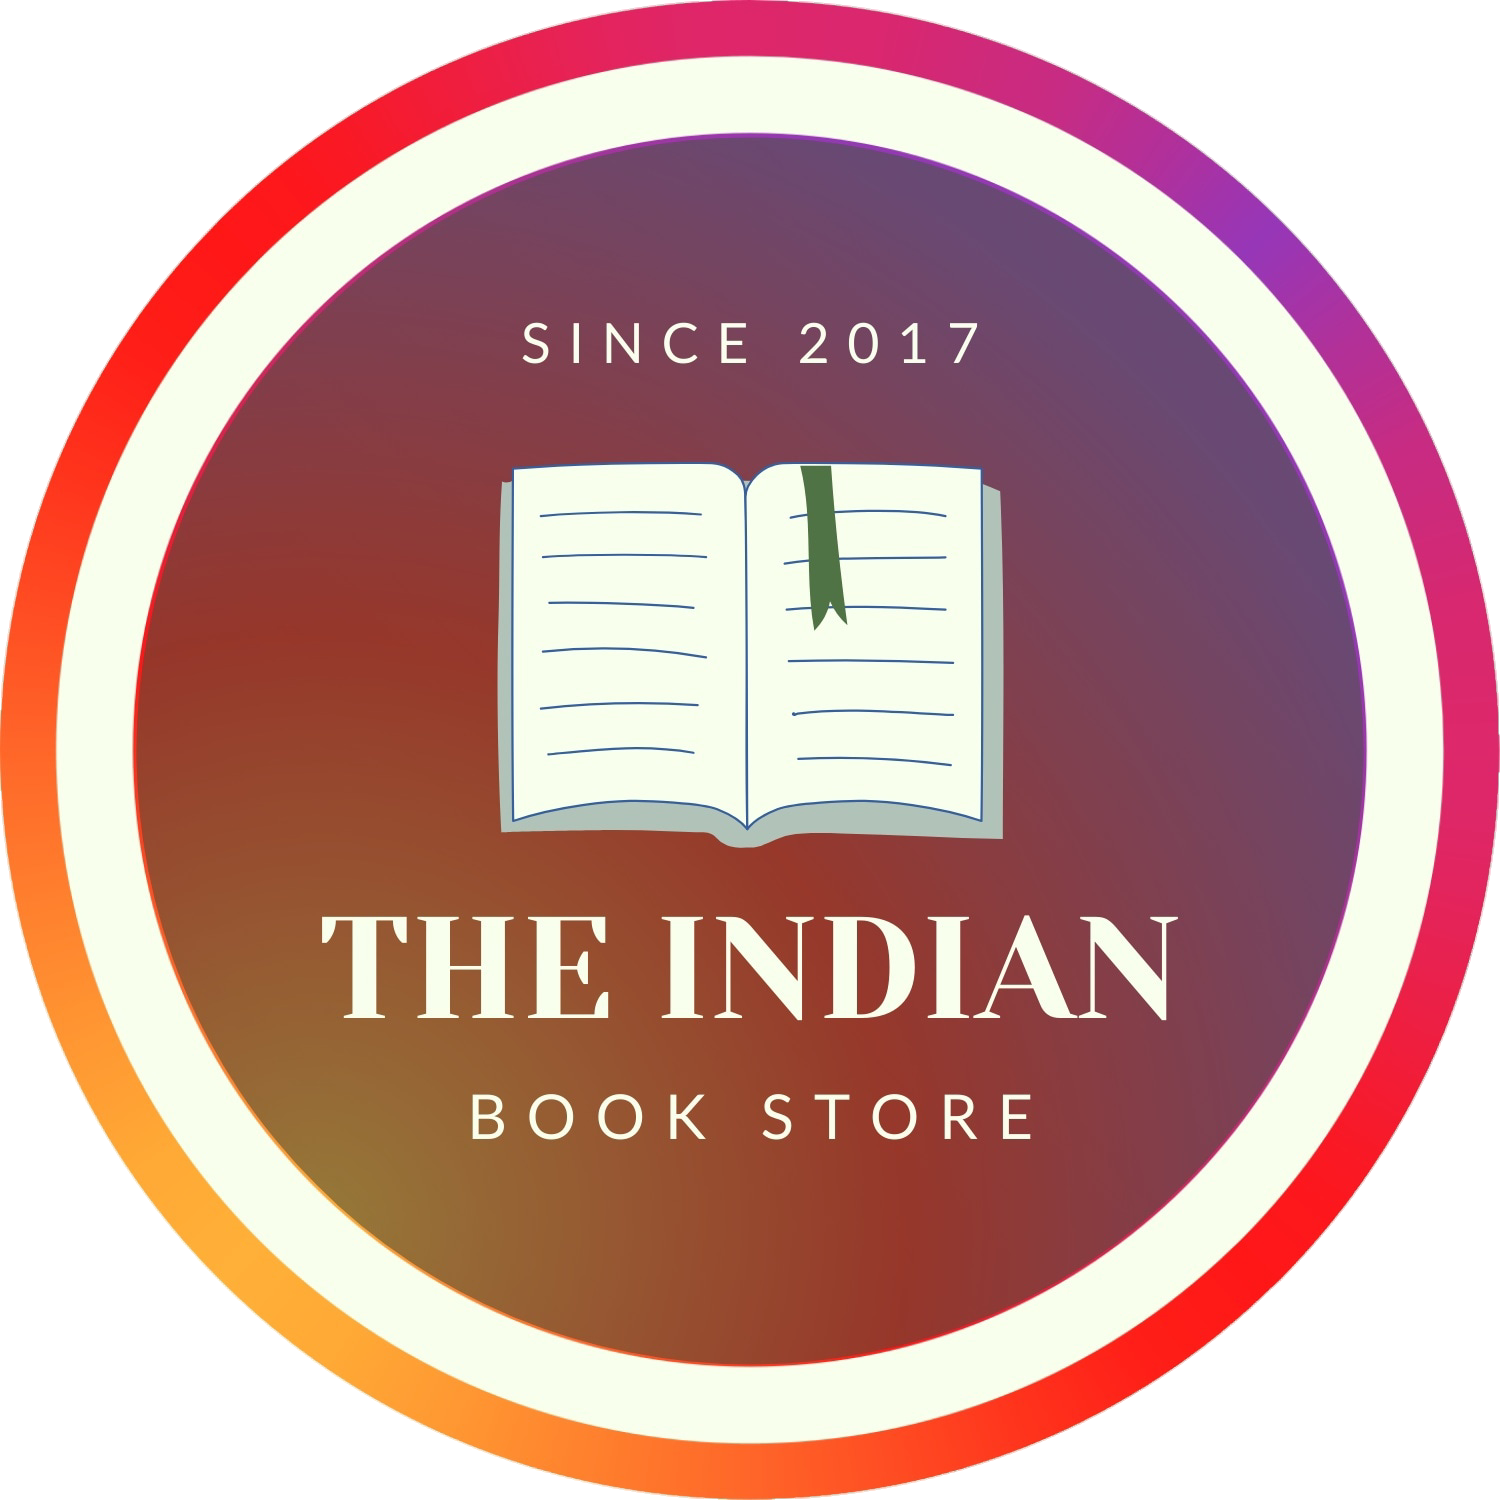 The Indian Book Store 